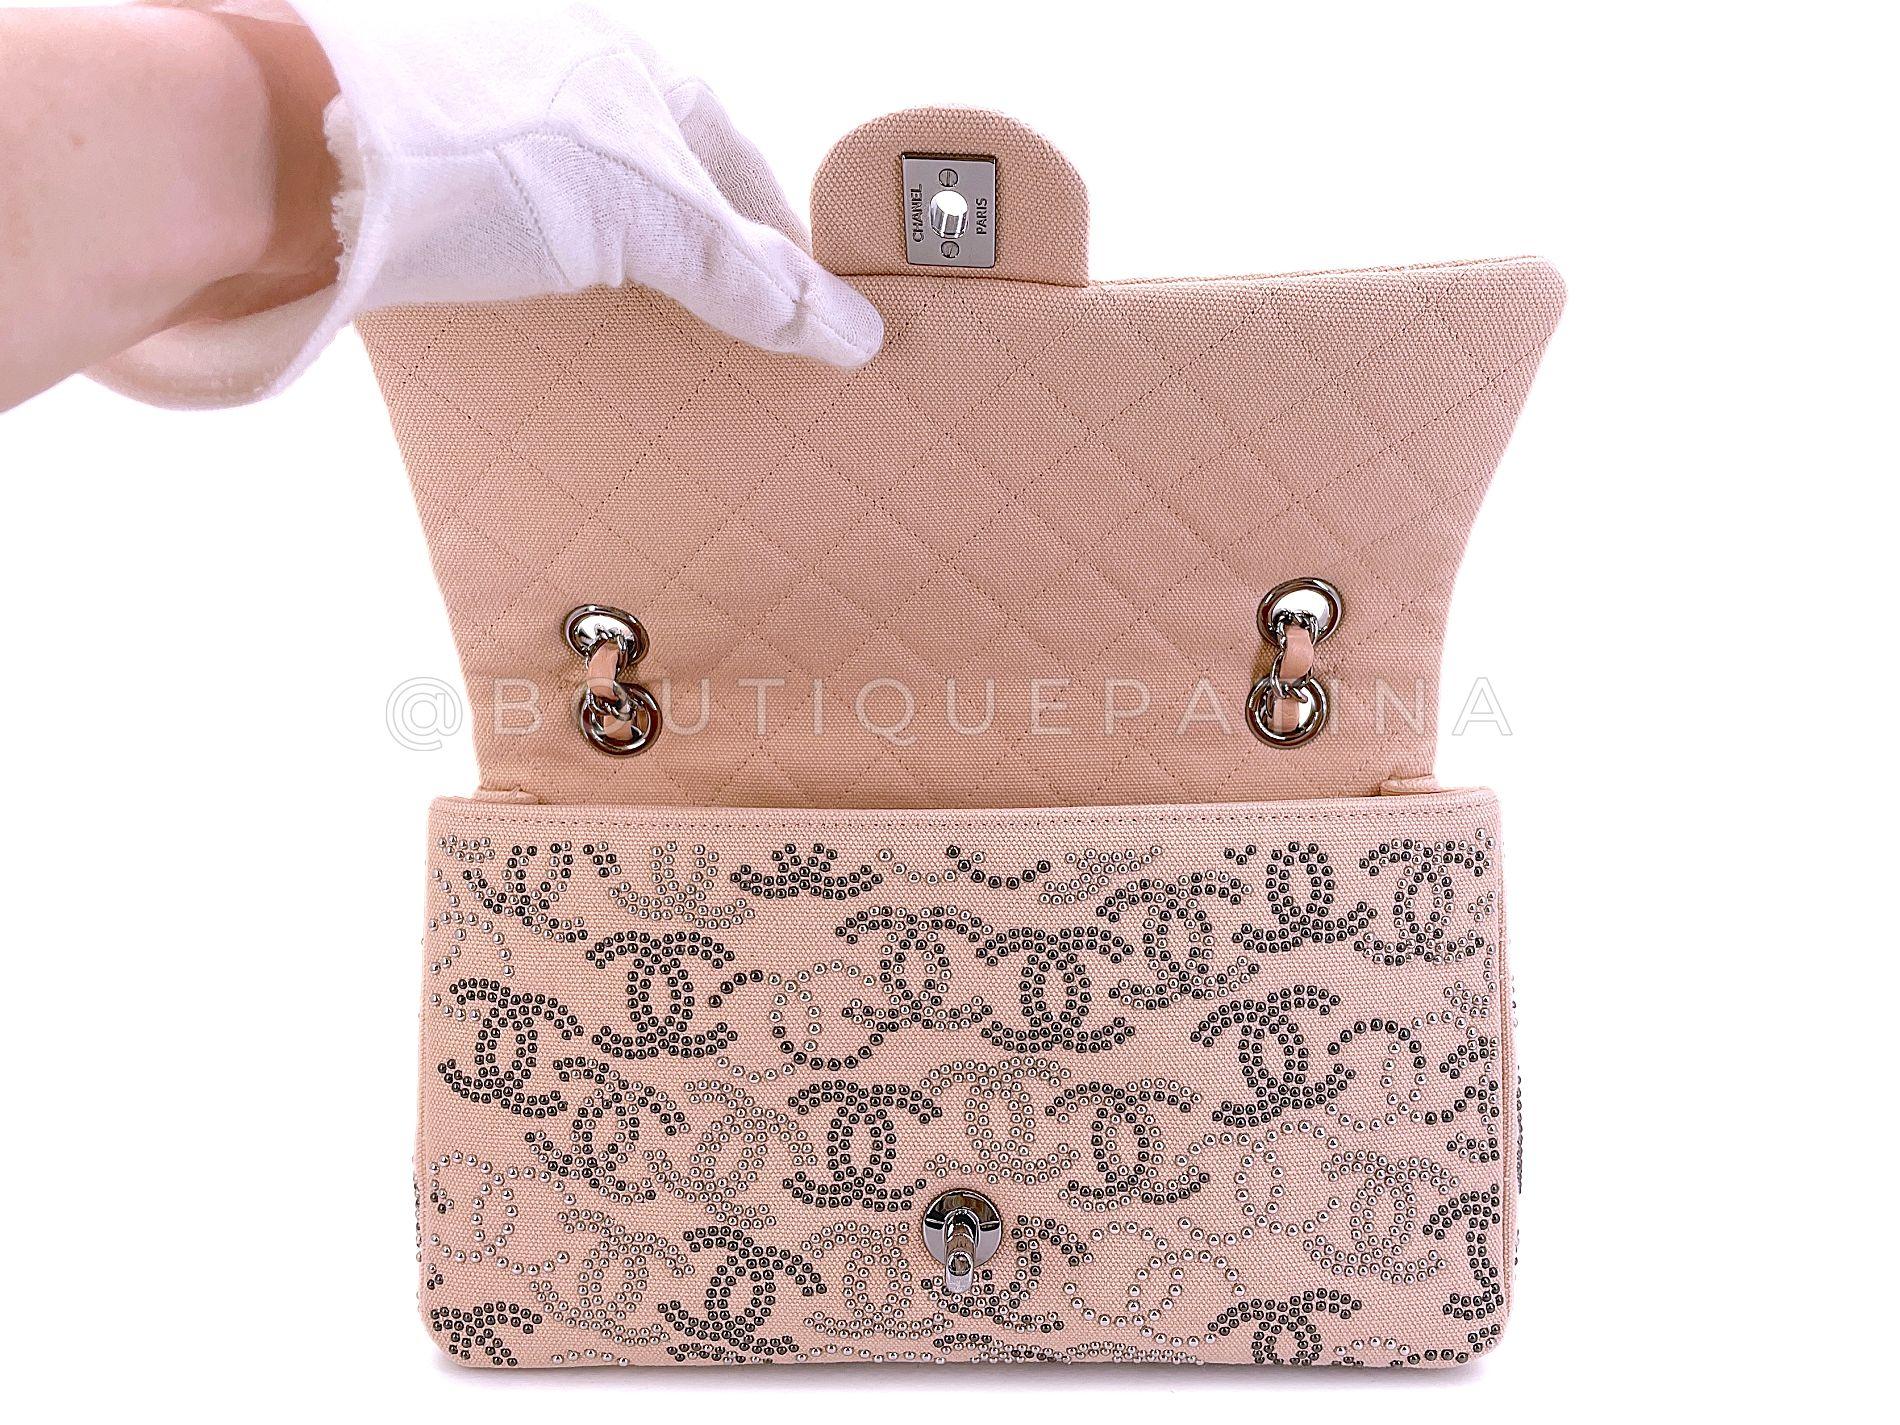 Chanel 2019 Pink Studded CCs Canvas Logomania Flap Bag RHW 67918 For Sale 5